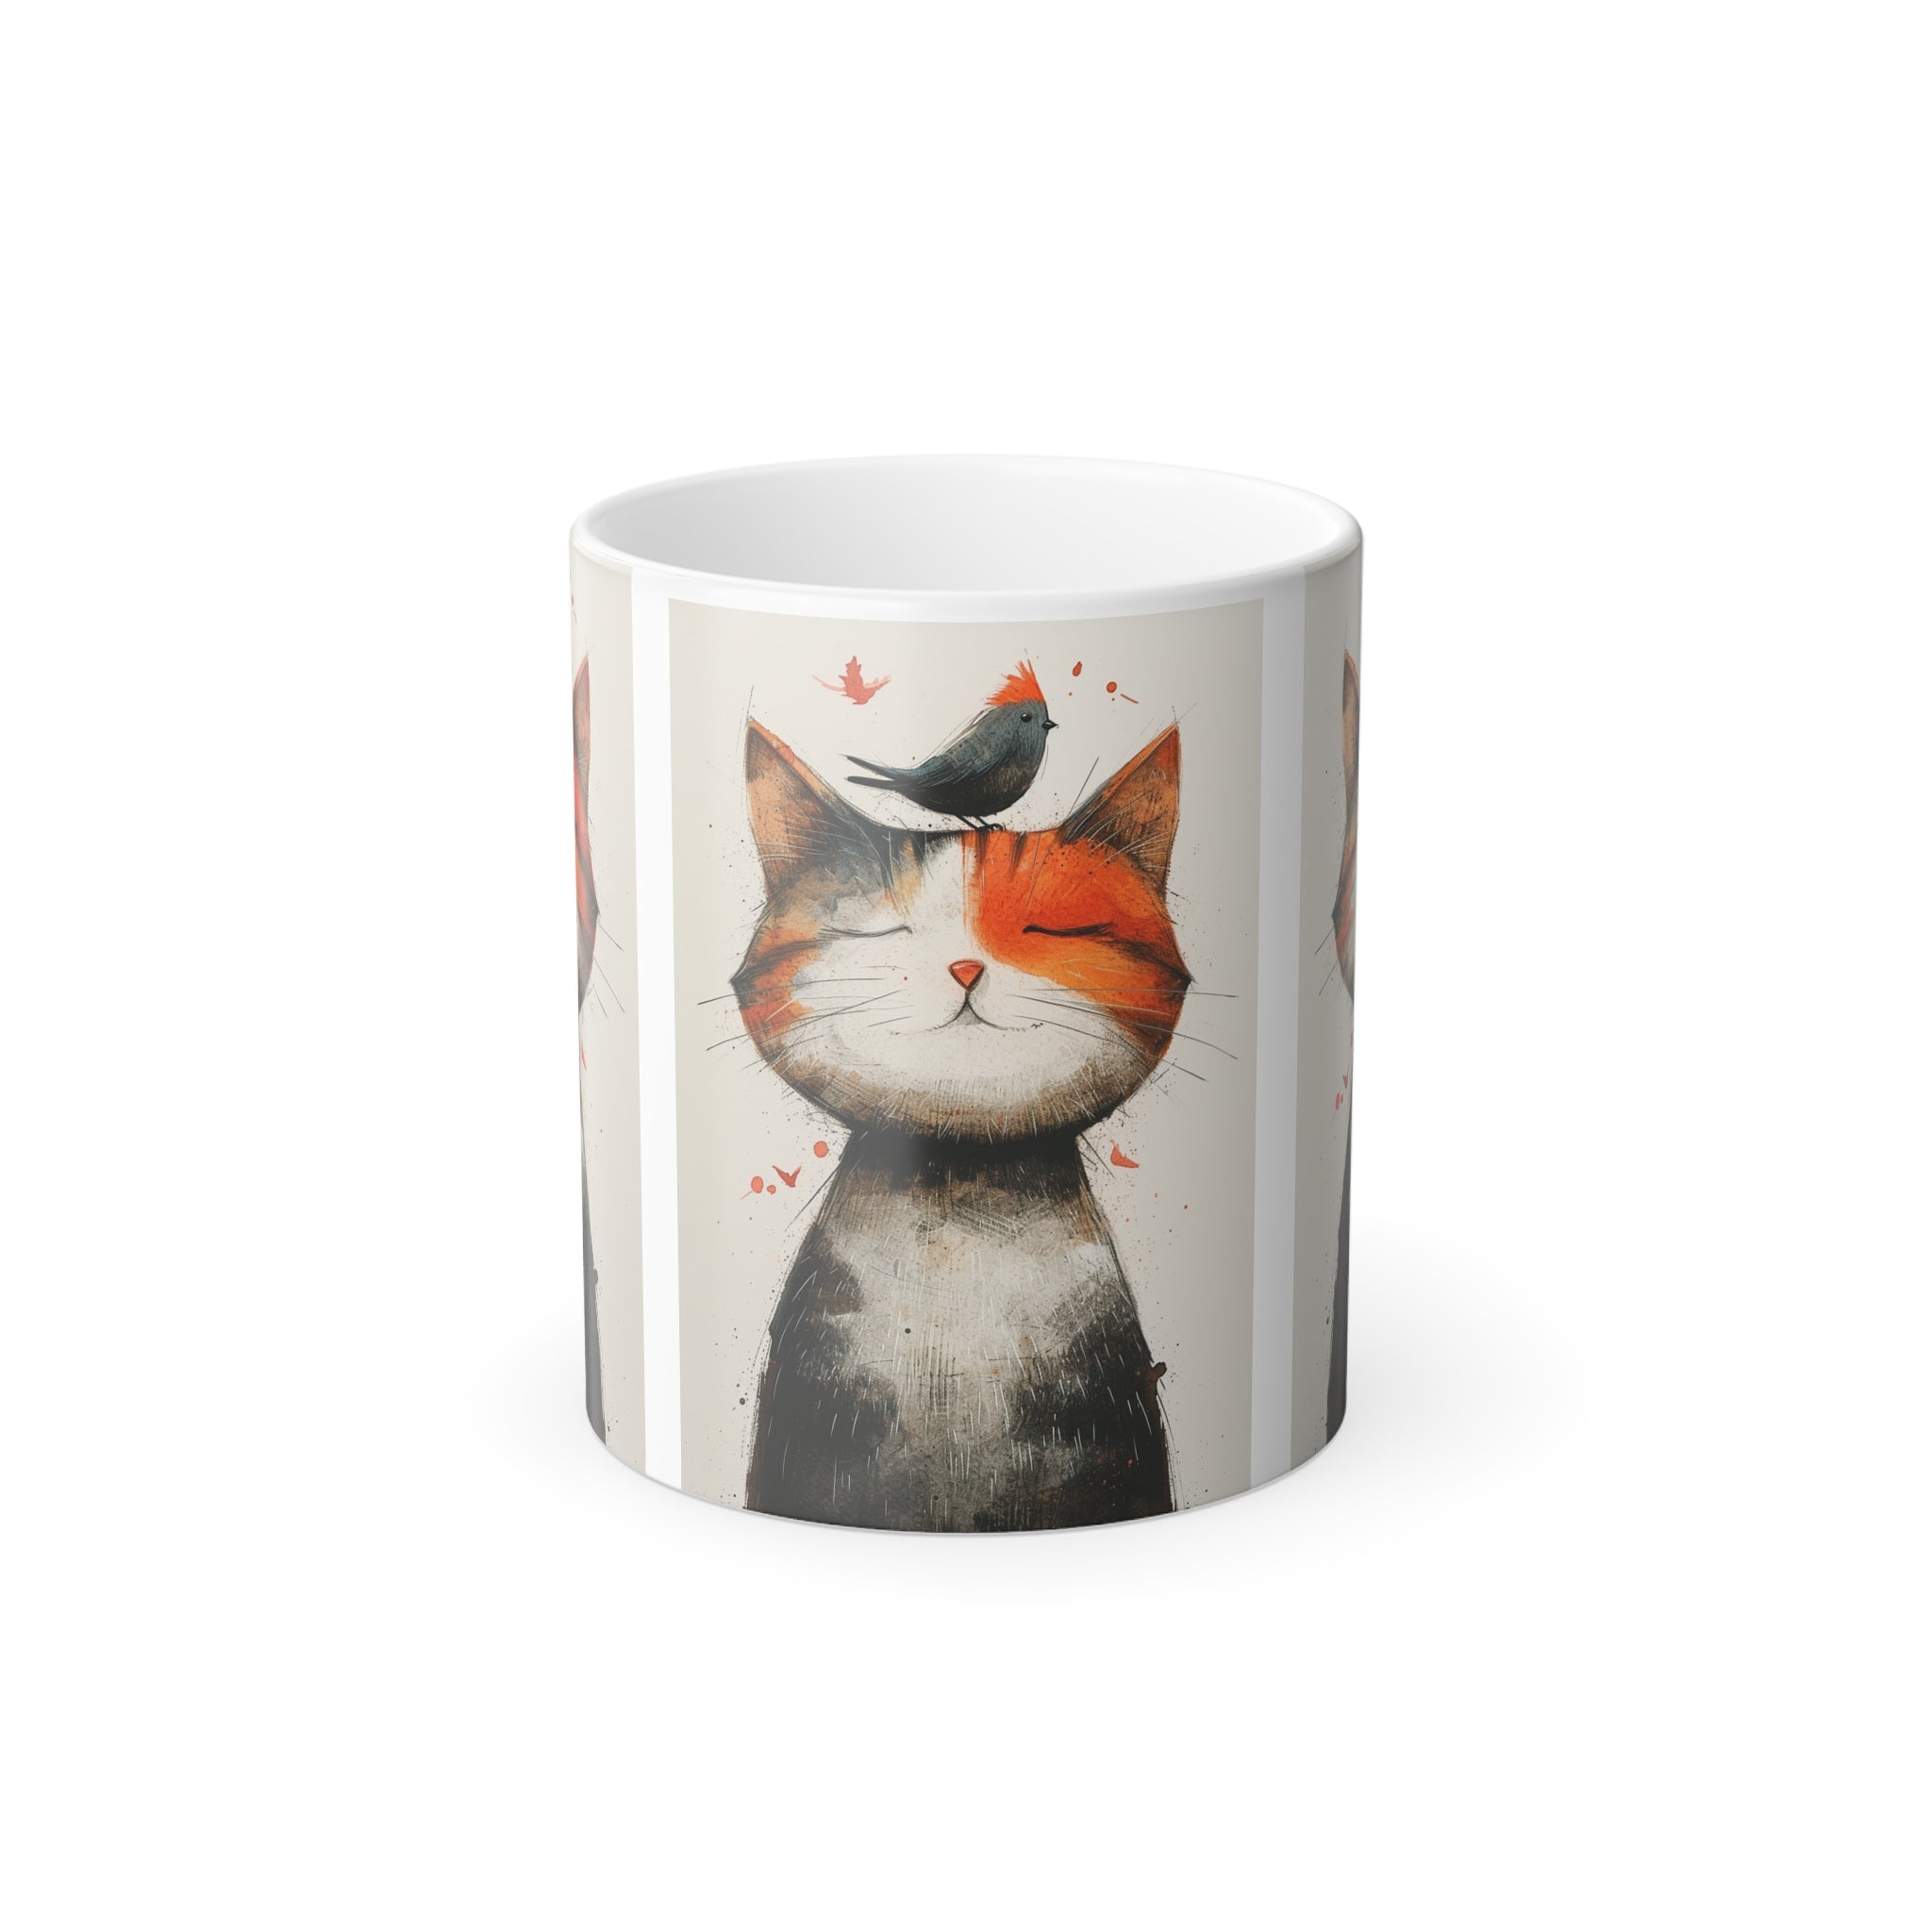 Combo Set 🐱🐦 Cat and Trusting Red Sparrow Friend Color Morphing Mug and Gratitude Journal - 11oz | Magic Heat-Changing Ceramic Cup for Cat Lovers | Unique Color-Shift Coffee Mug